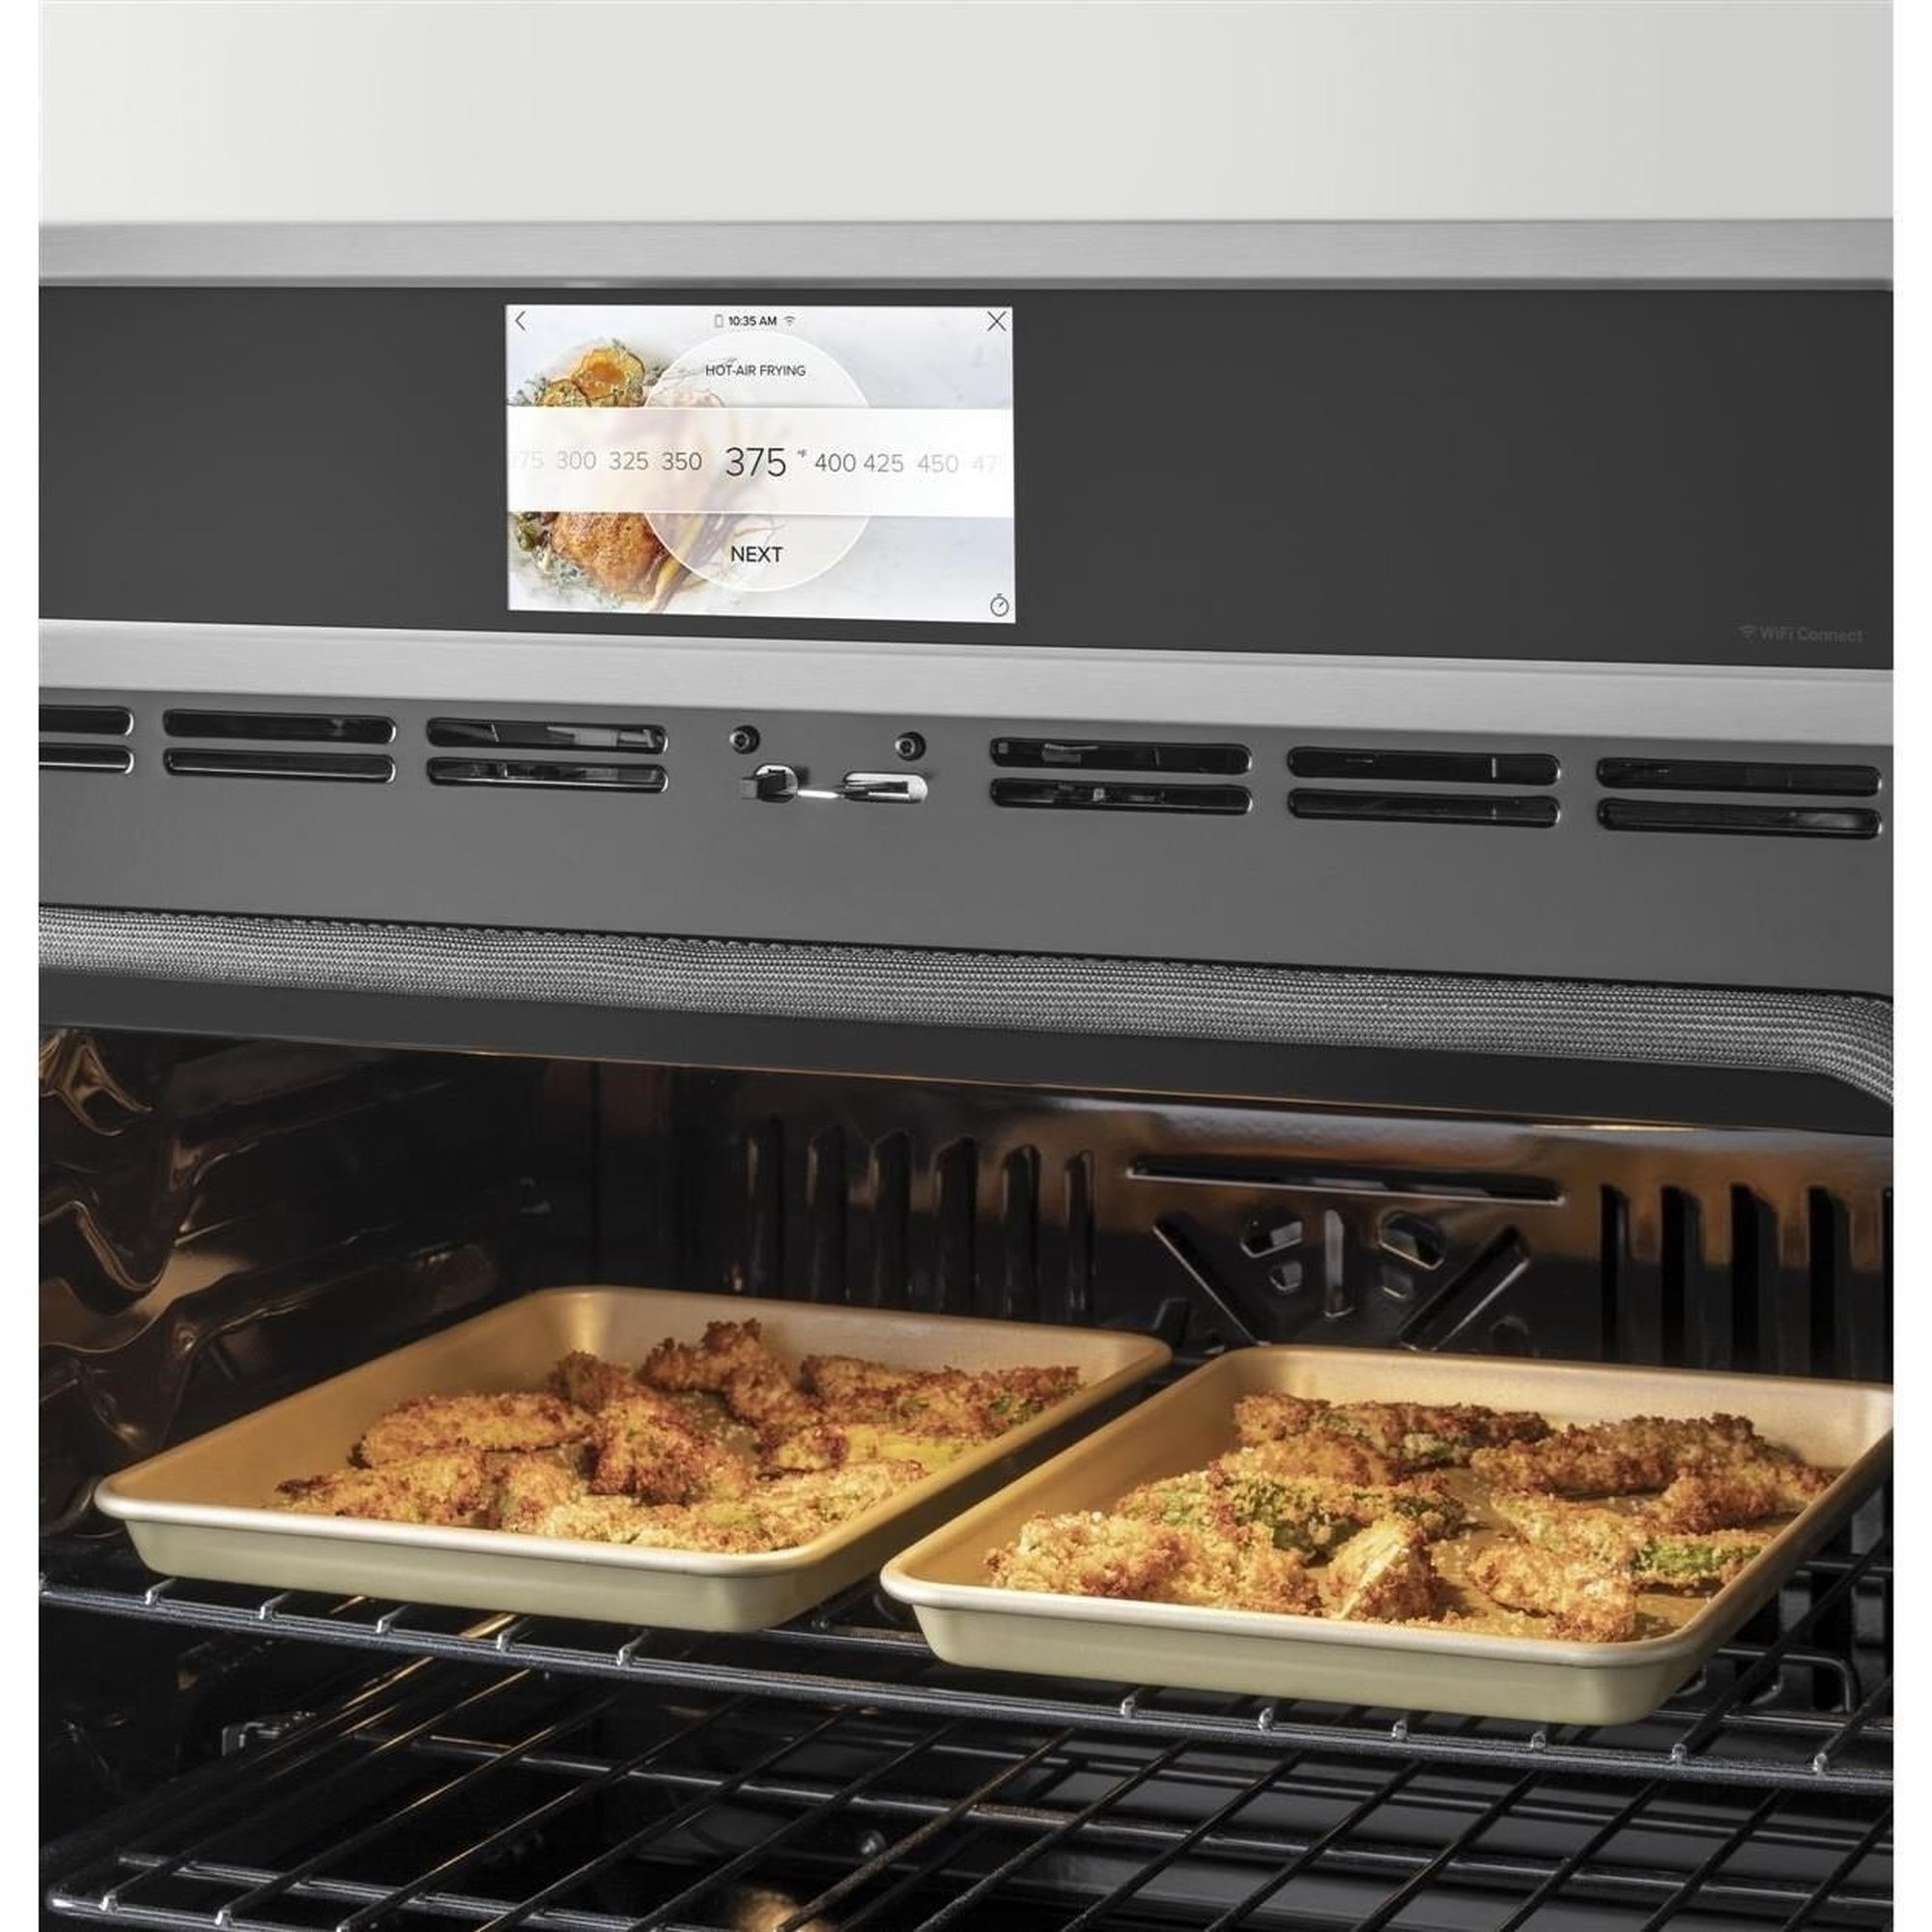 https://imageresizer4.furnituredealer.net/img/remote/images.furnituredealer.net/img/products%2Fge_appliances%2Fcolor%2Fge%20electric%20wall%20ovens%20-%202015_ctd90fp2ns1-b5.jpg?width=2000&height=2000&scale=both